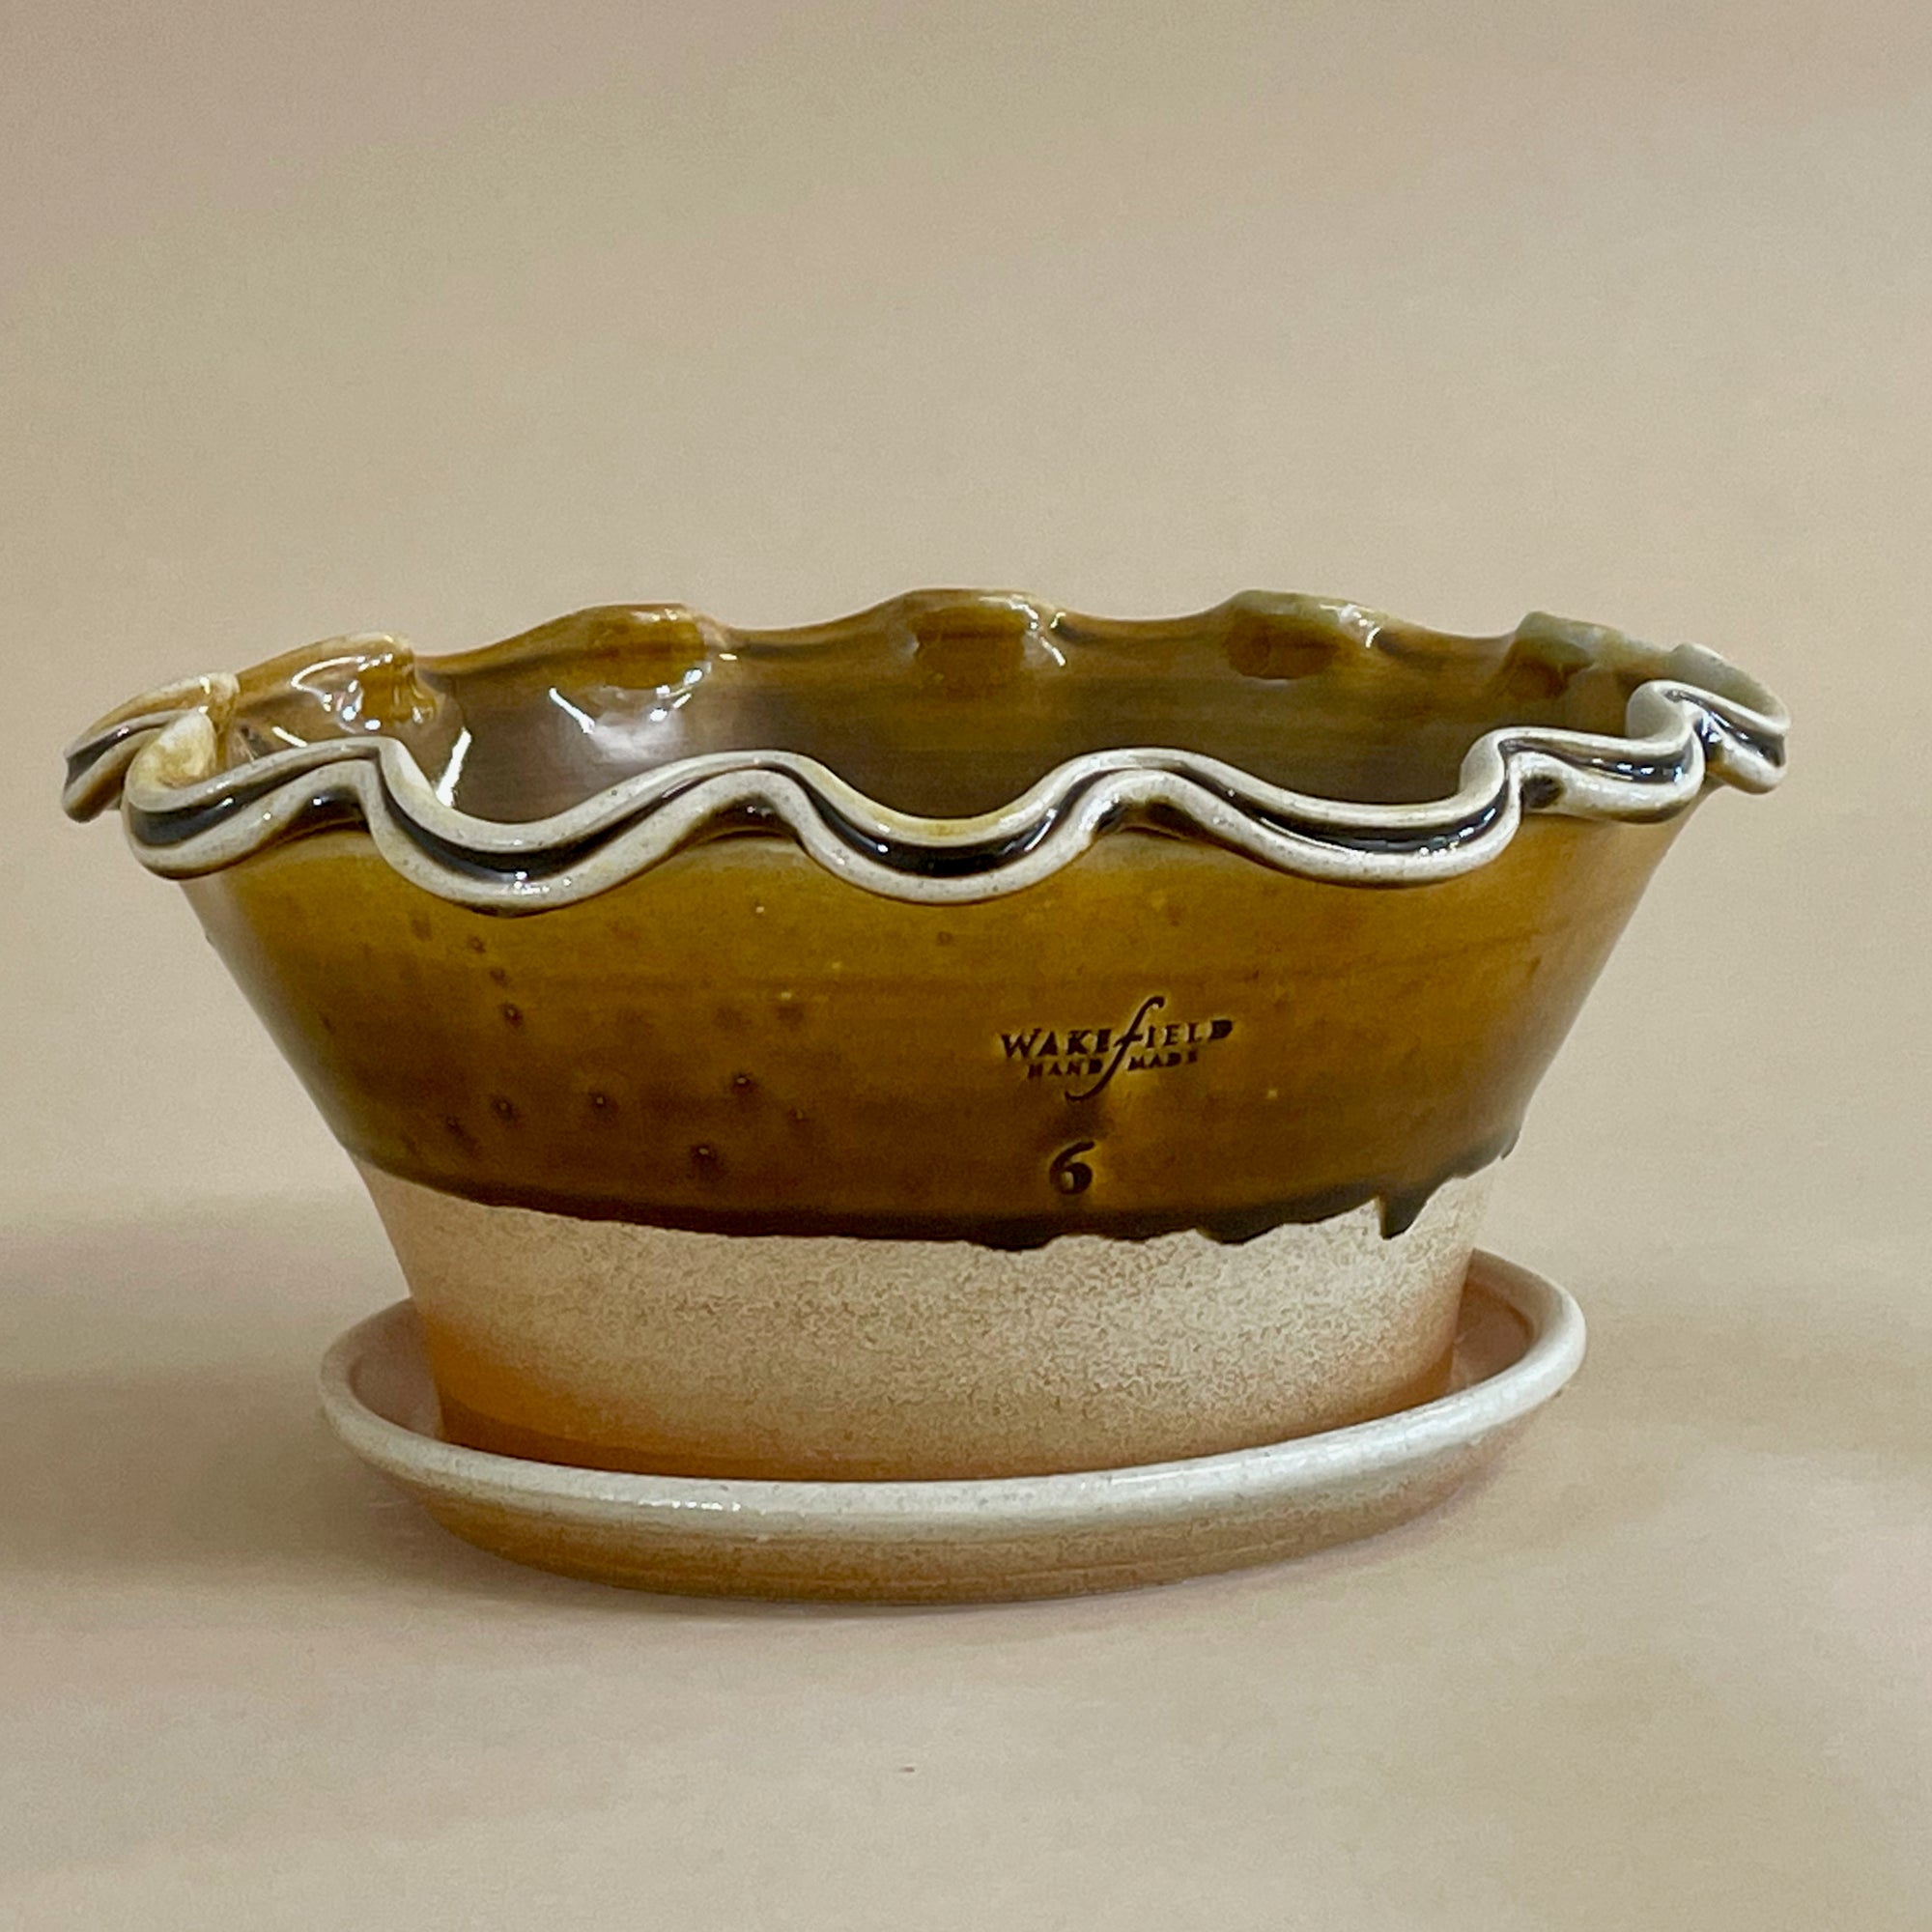 English Split Rim Scallop with Attached Saucer